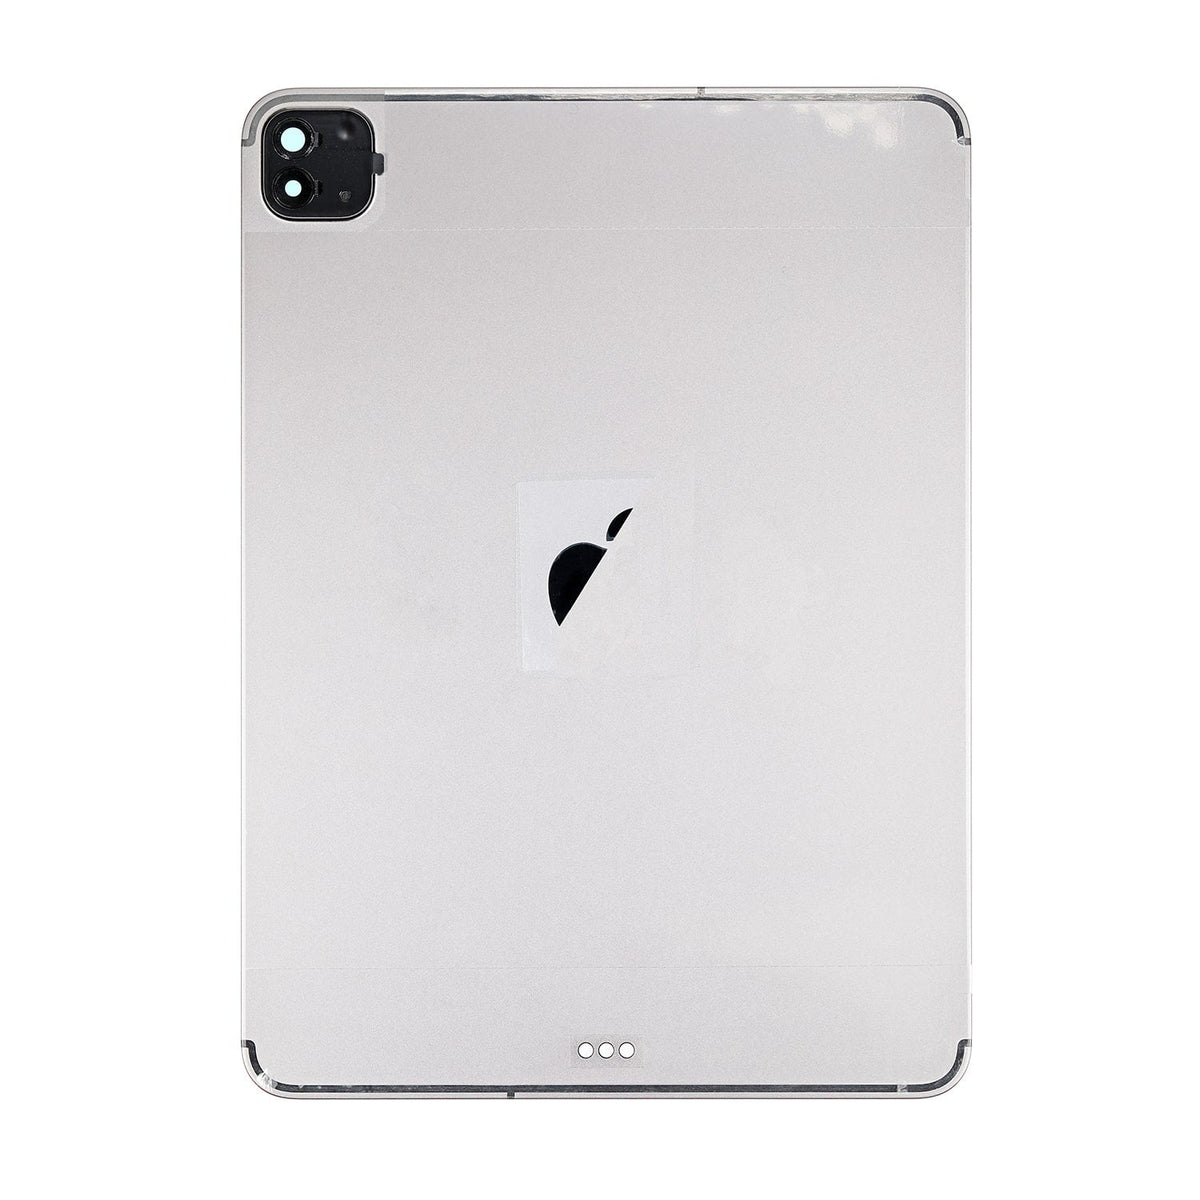 BACK COVER WIFI + CELLULAR VERSION FOR IPAD PRO 11(2ND) - SILVER